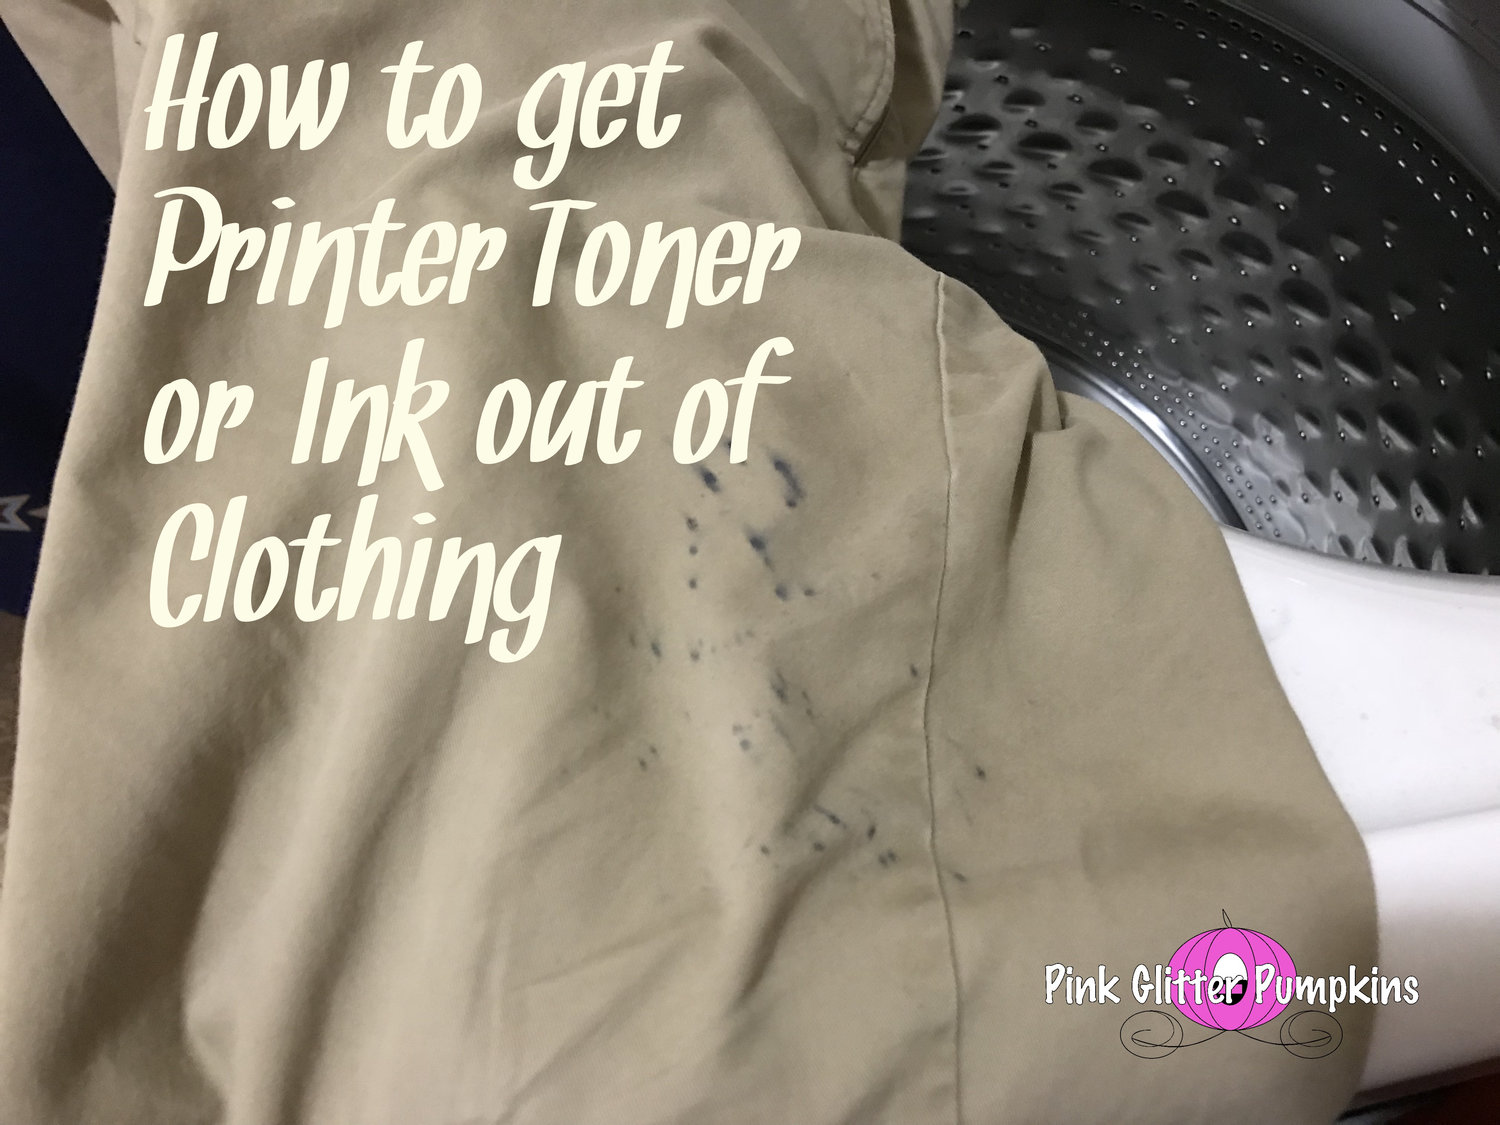 How to get Printer Toner or Ink out of Clothing — Pink Glitter Pumpkins